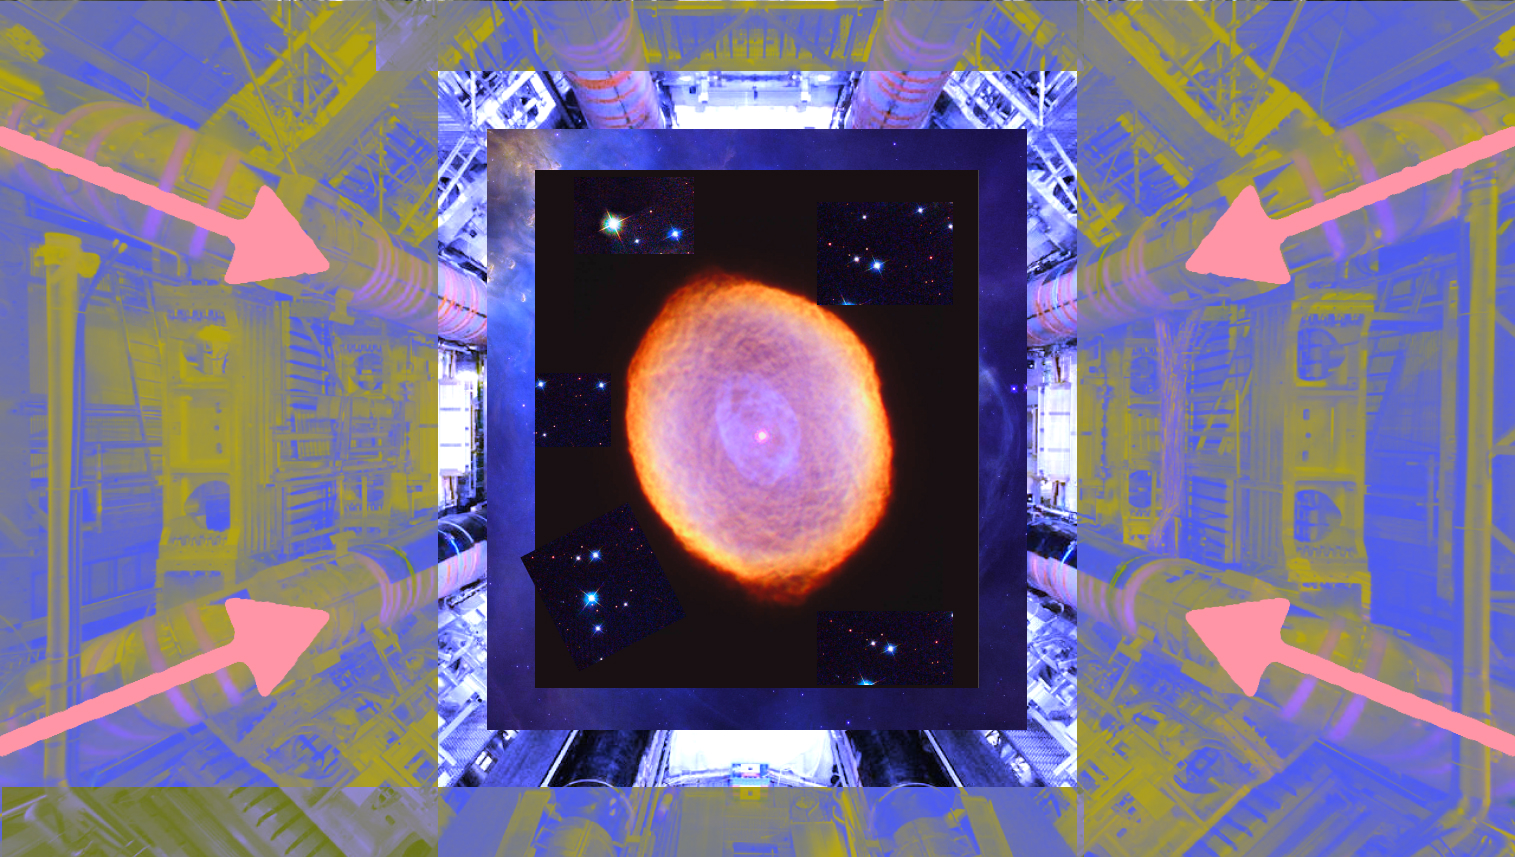 A digital image of a star's structure superimposed on a futuristic tunnel with neon arrow accents.